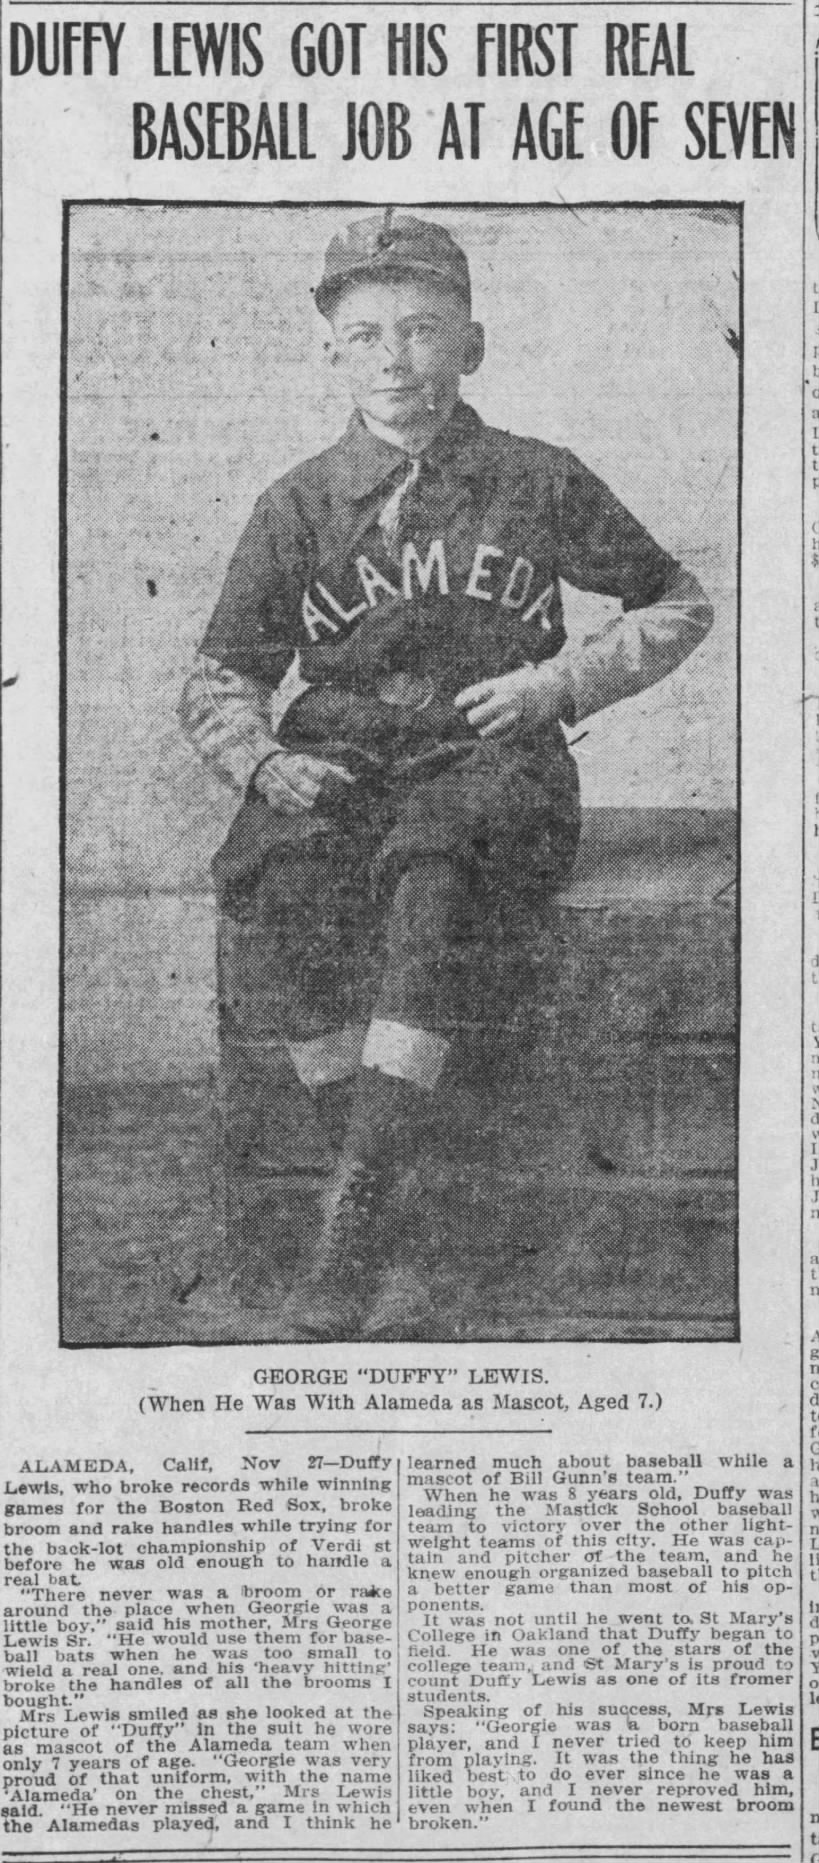 Duffy Lewis Got His First Real Baseball Job At Age Of Seven